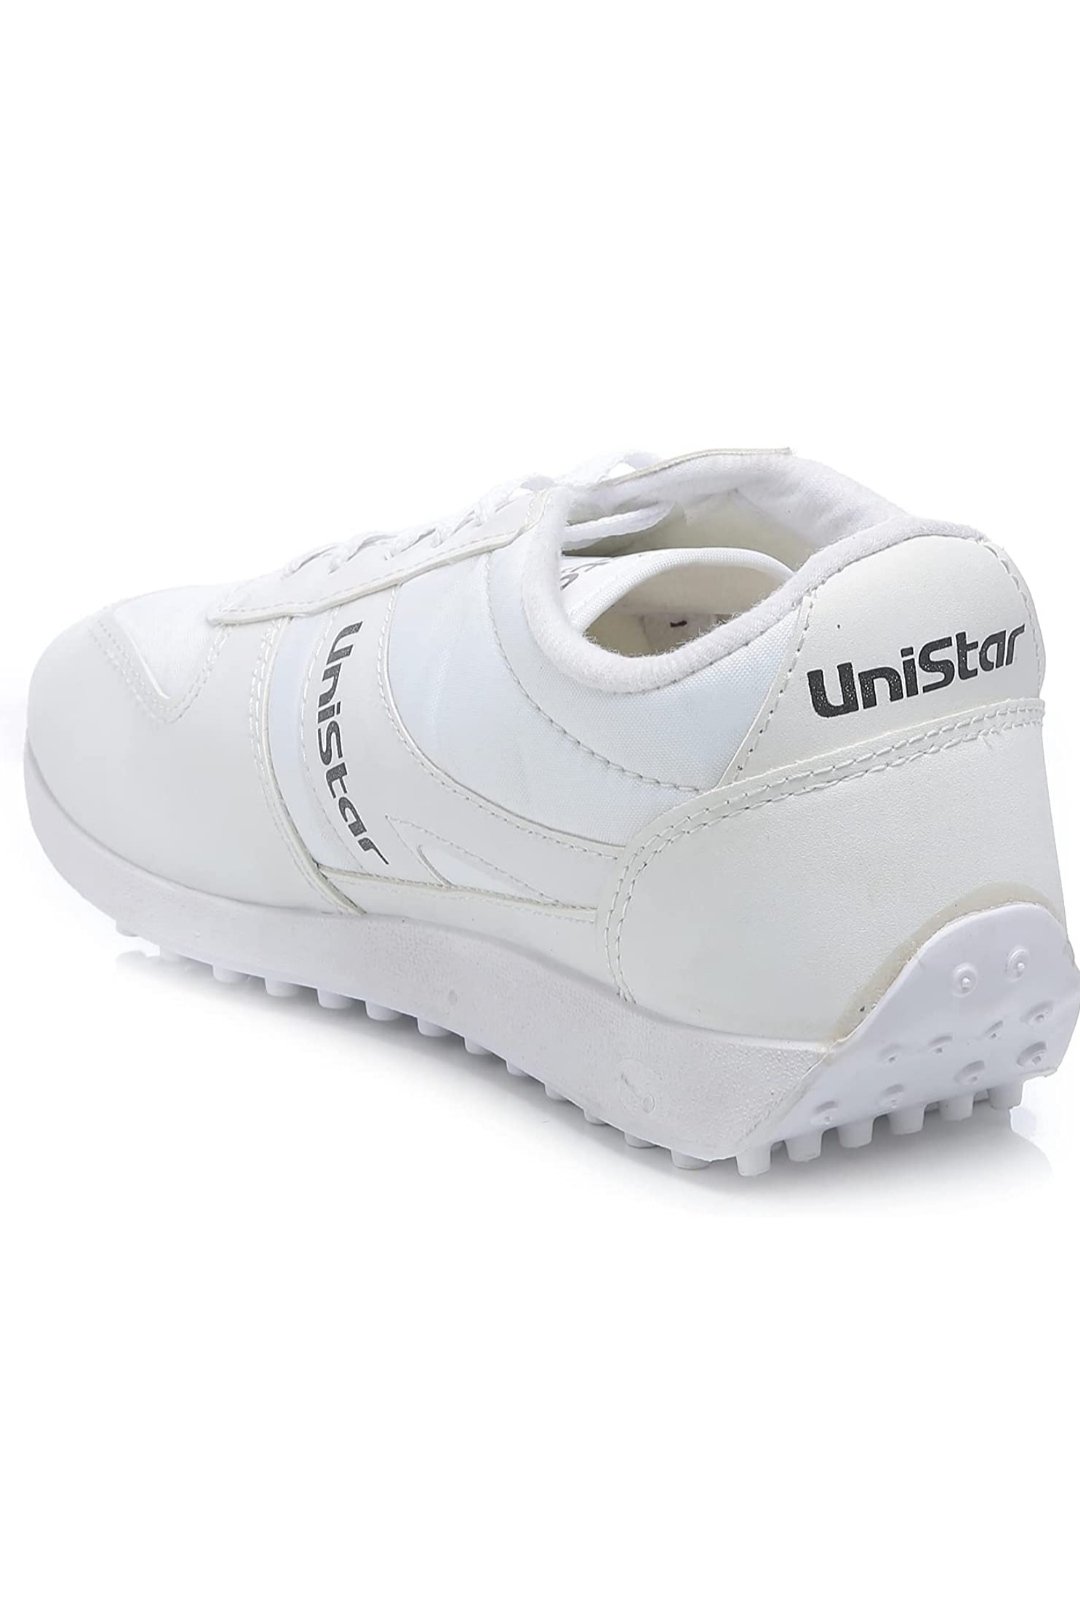 Buy Unistar Men Multi-Colour Running Shoes (E-602) at Amazon.in-iangel.vn